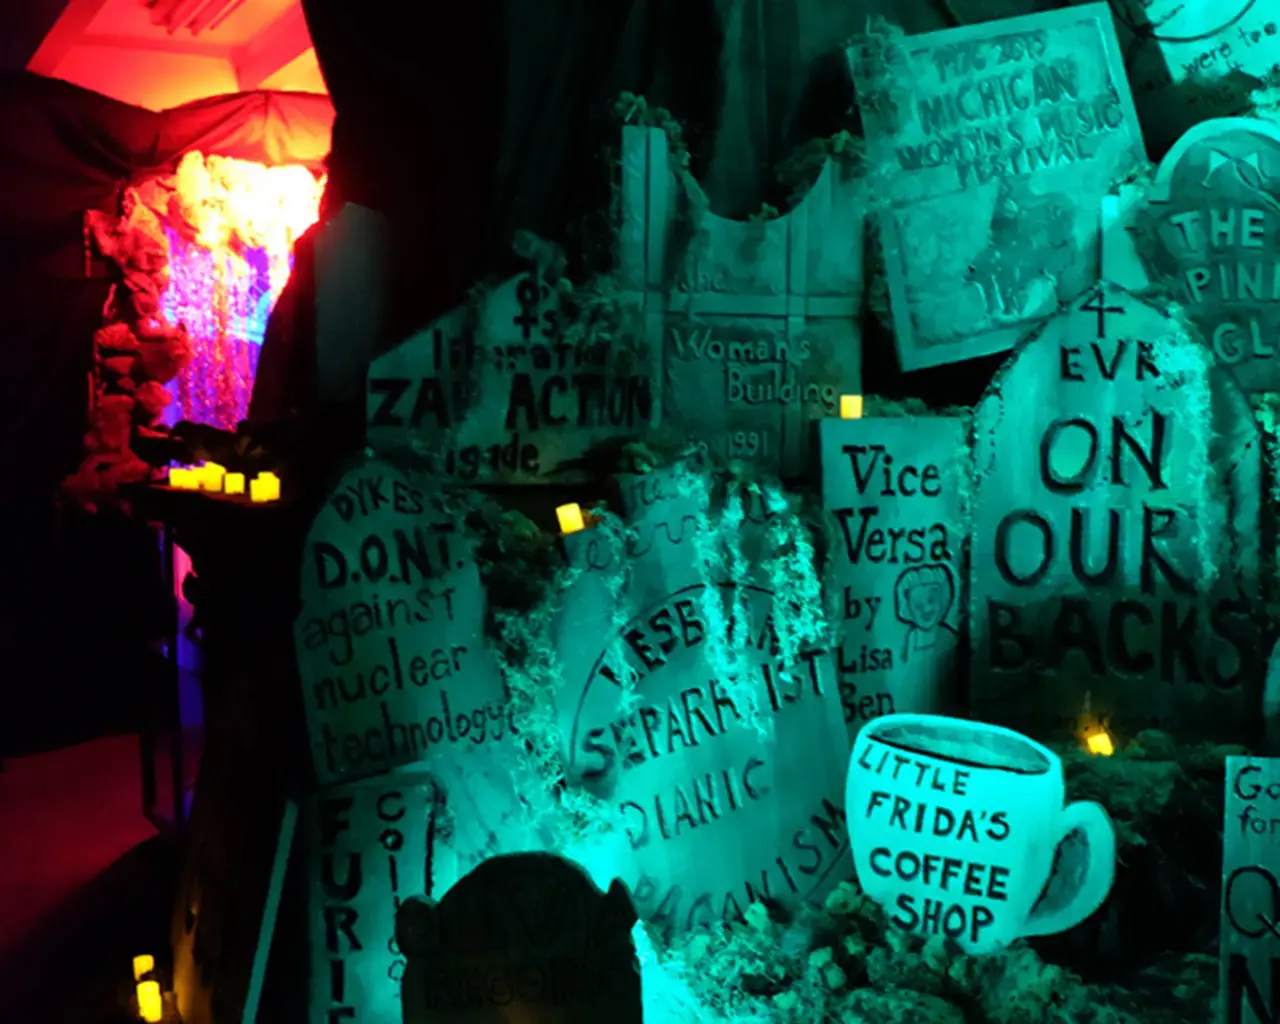 Allyson Mitchell and Deirdre Logue, Killjoy’s Kastle installation view, graveyard of dead lesbian feminist organizations, businesses, and ideas. Photograph courtesy of artist.